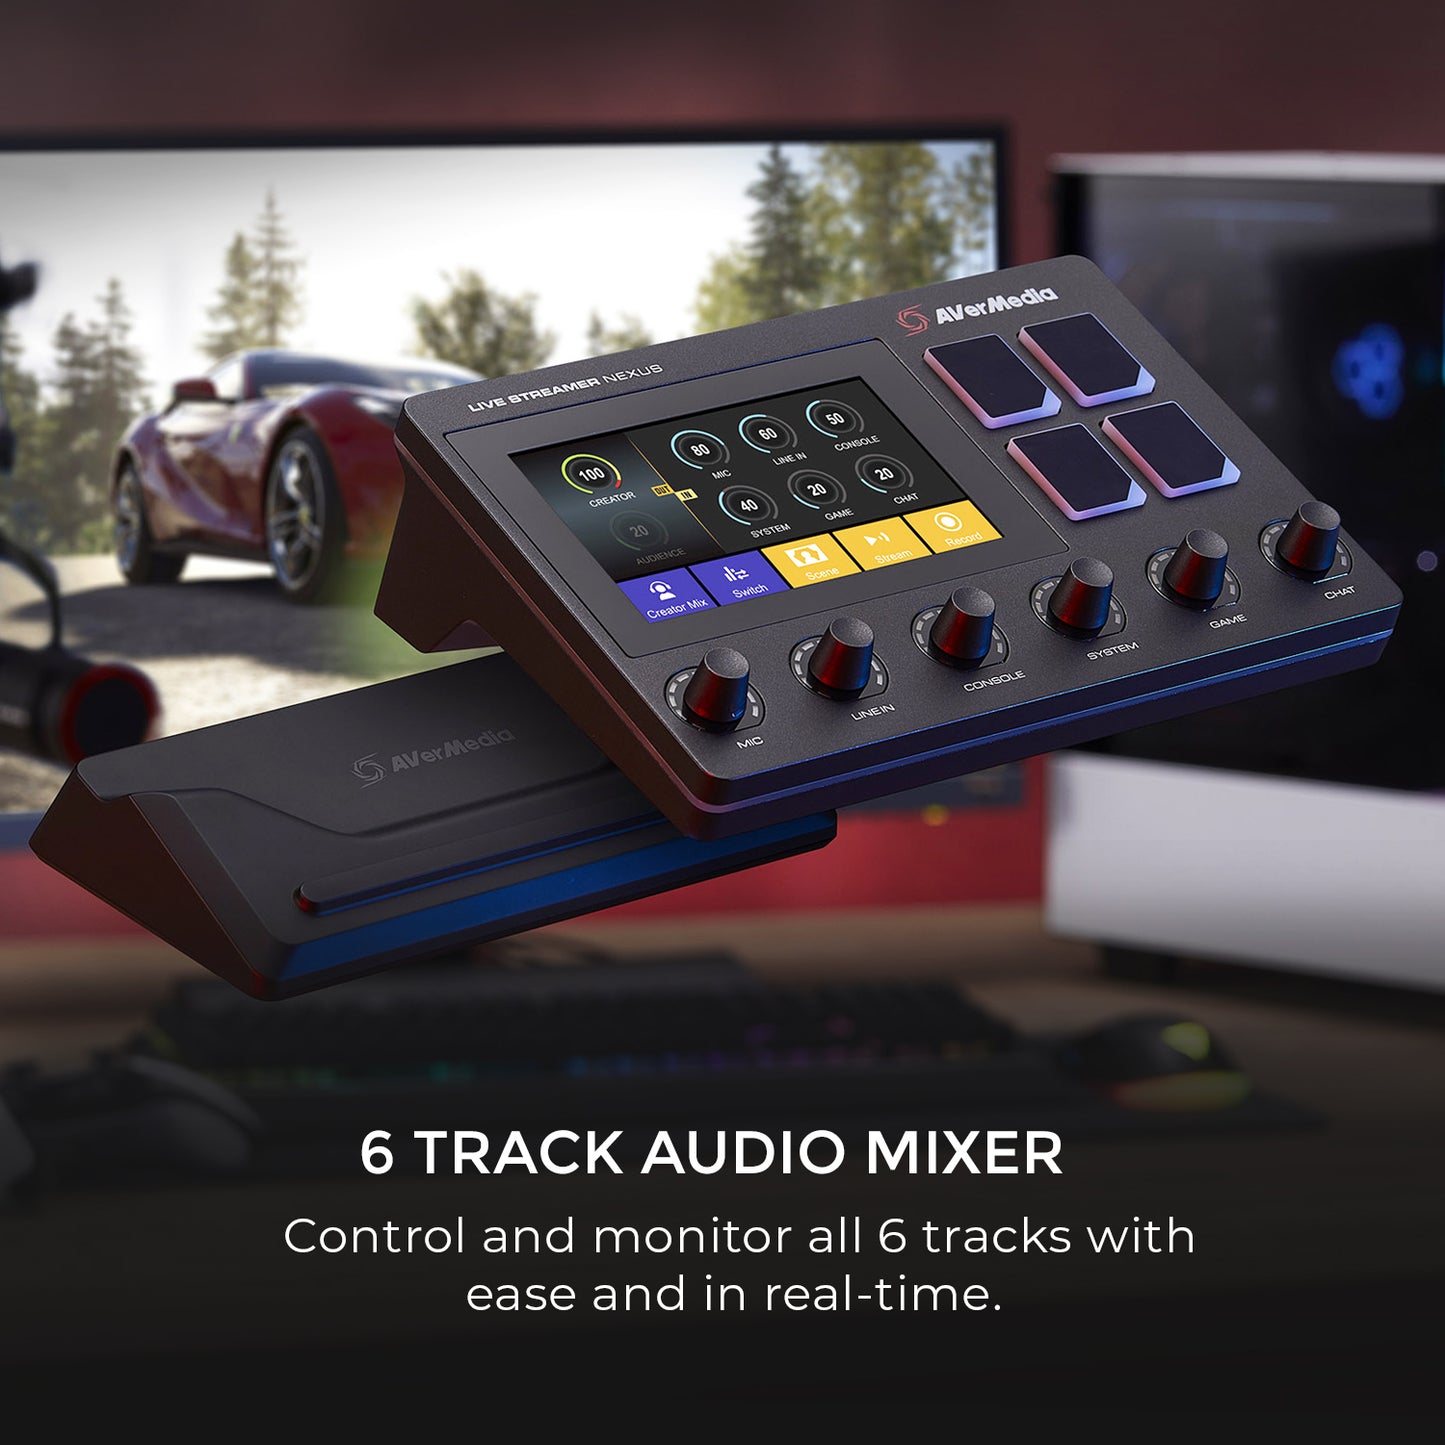 Audio Control Center for Twitch Streaming with 6 tack audio mixer